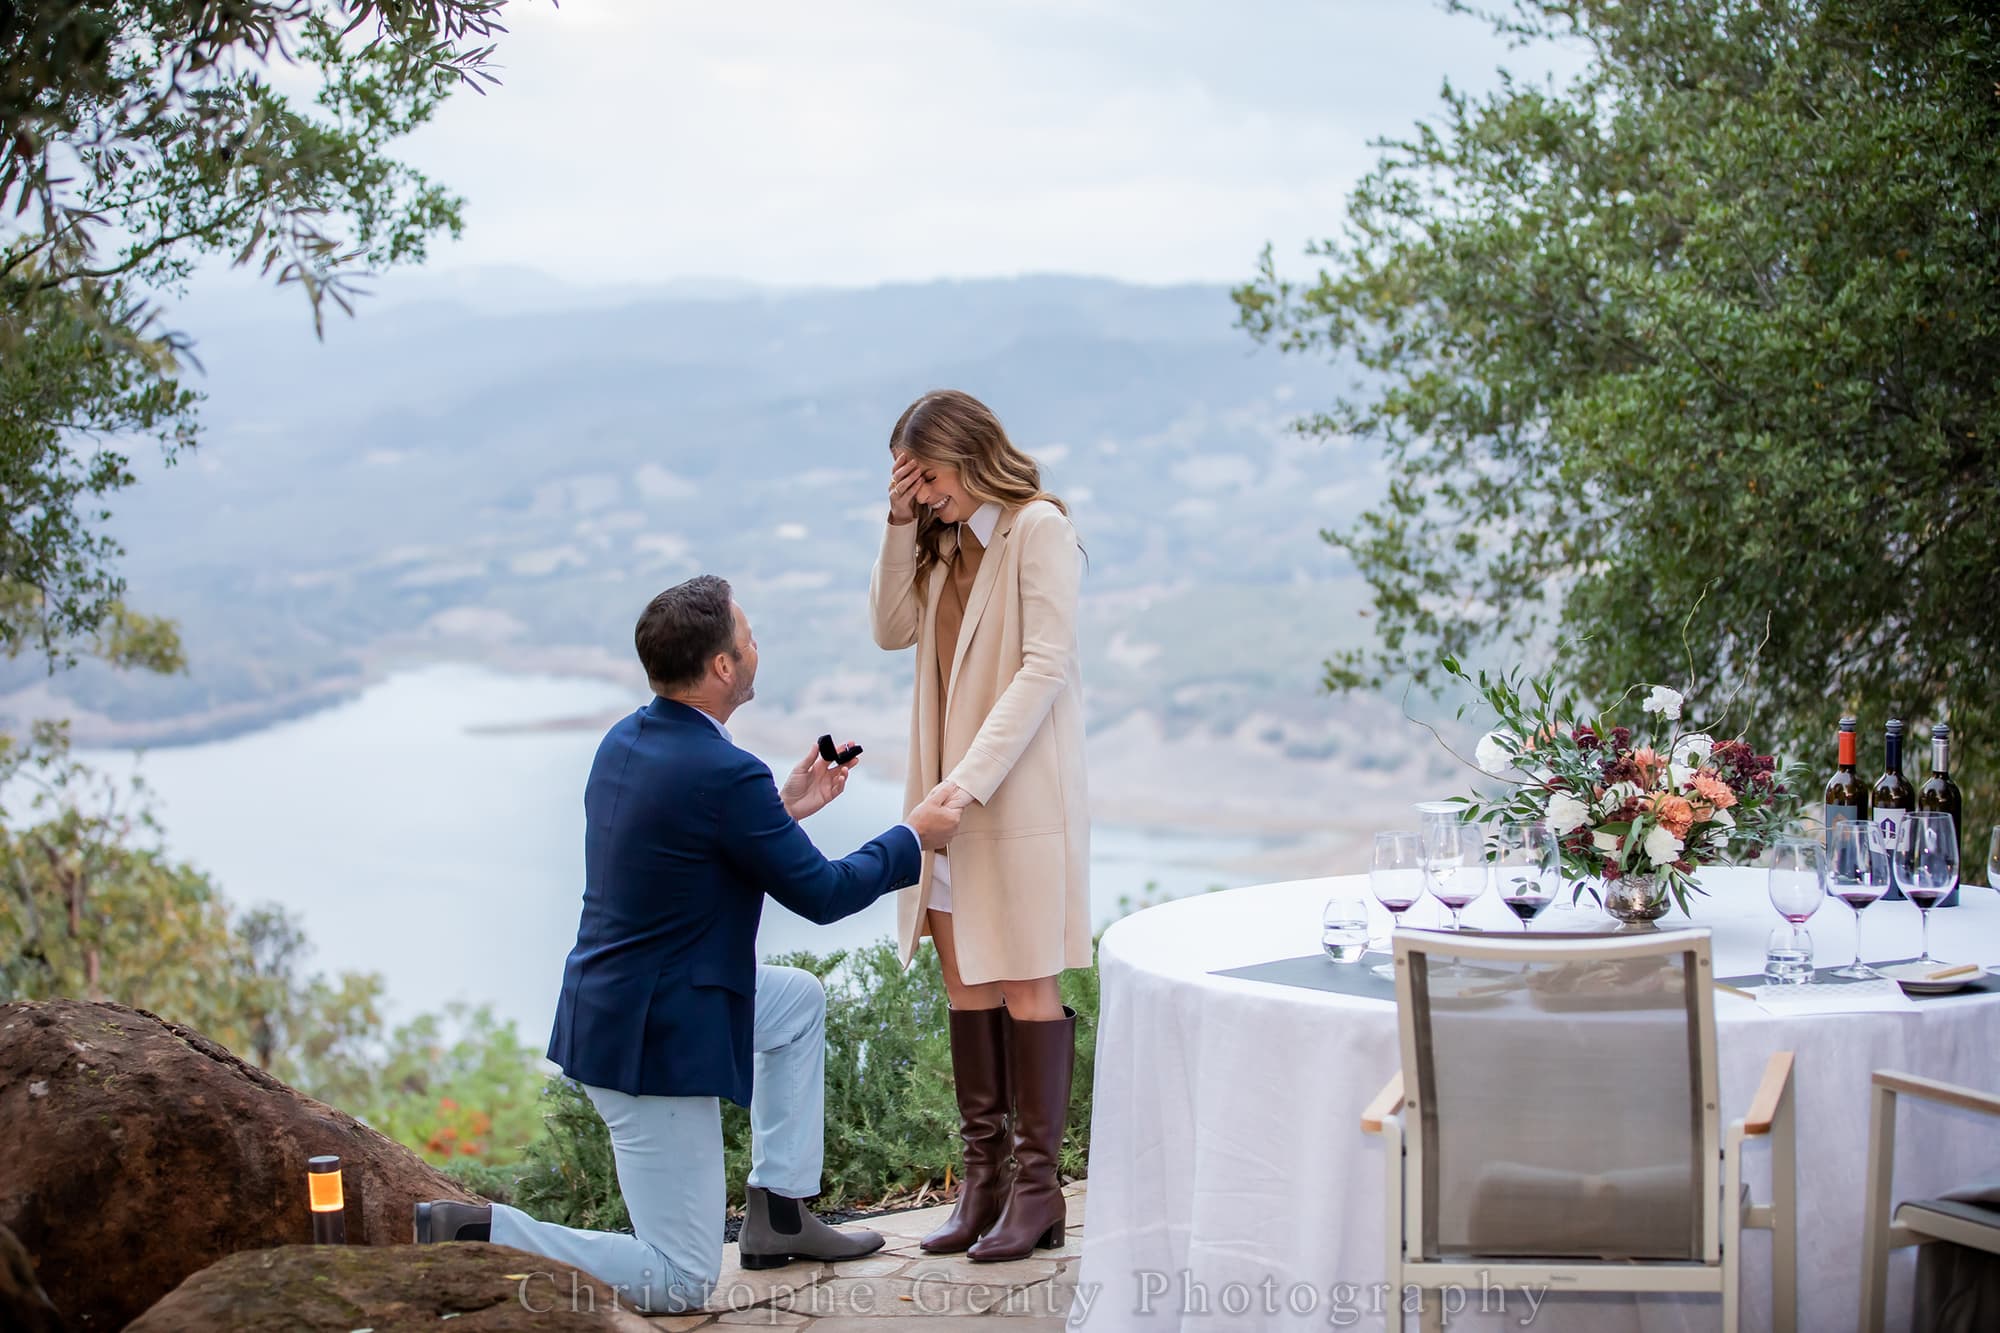 Best Wineries to propose in the Napa Valley - Private Winery in Napa